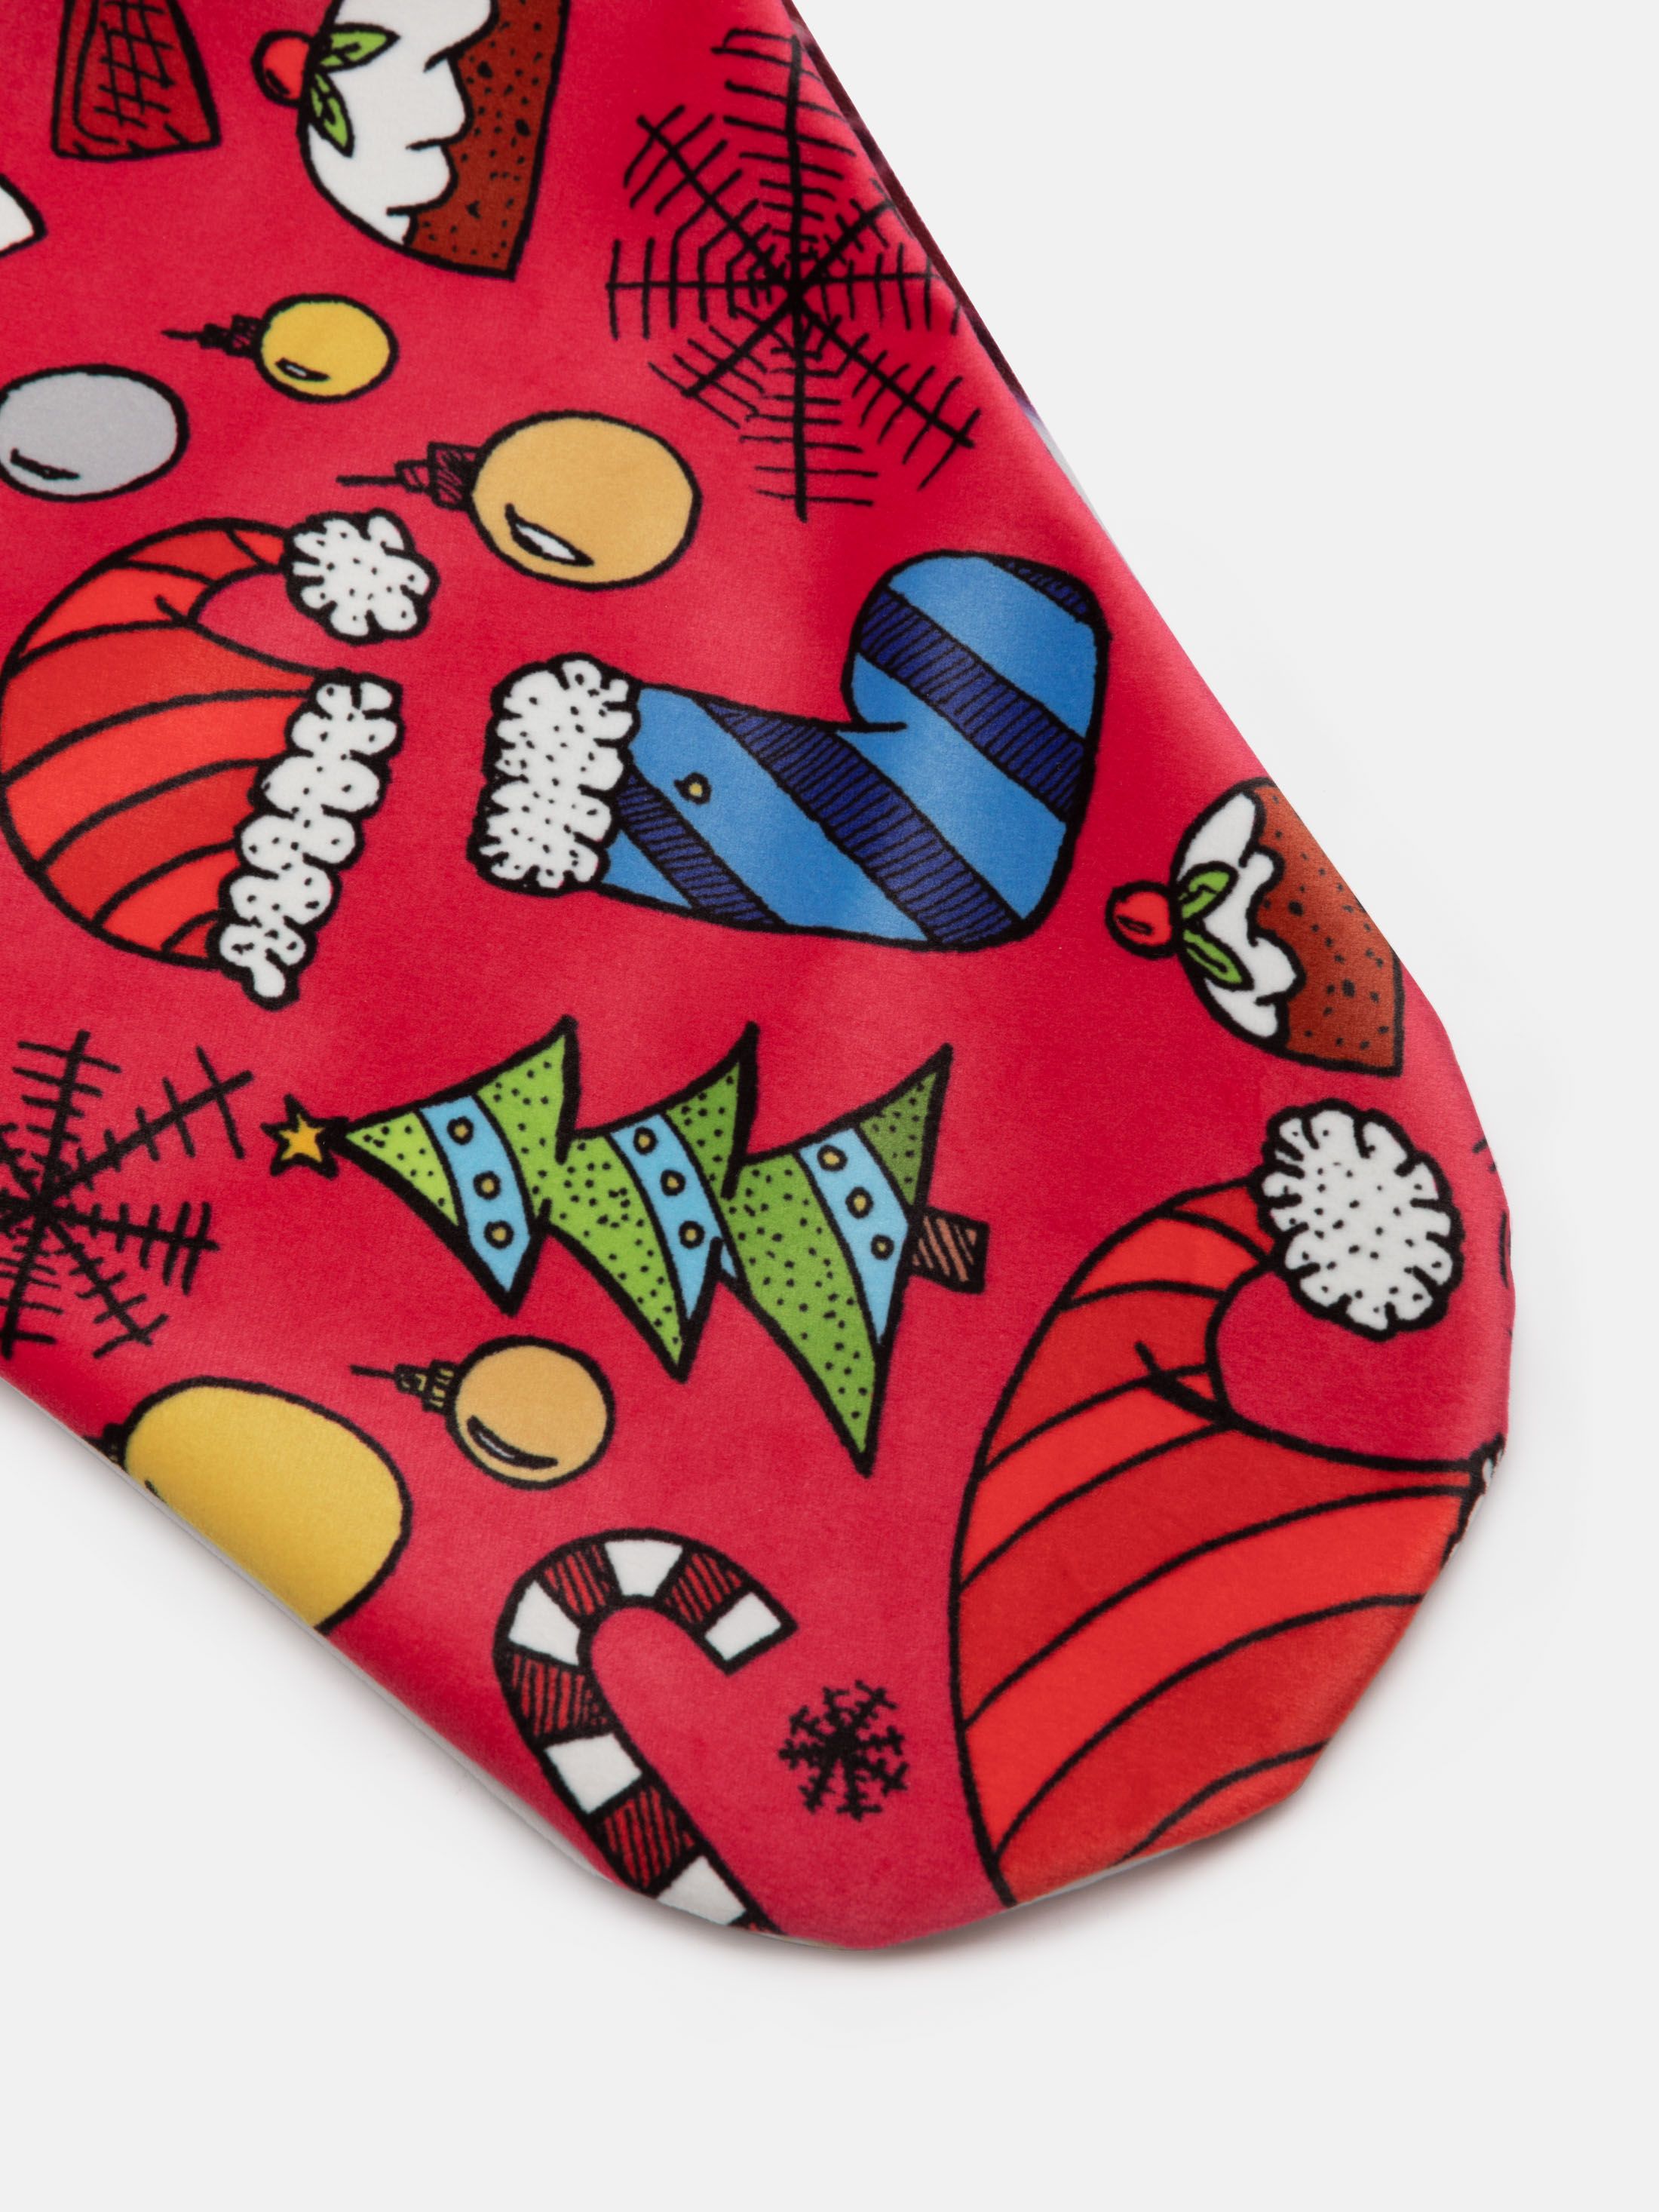 make your own christmas stocking printed with festive icons and colour